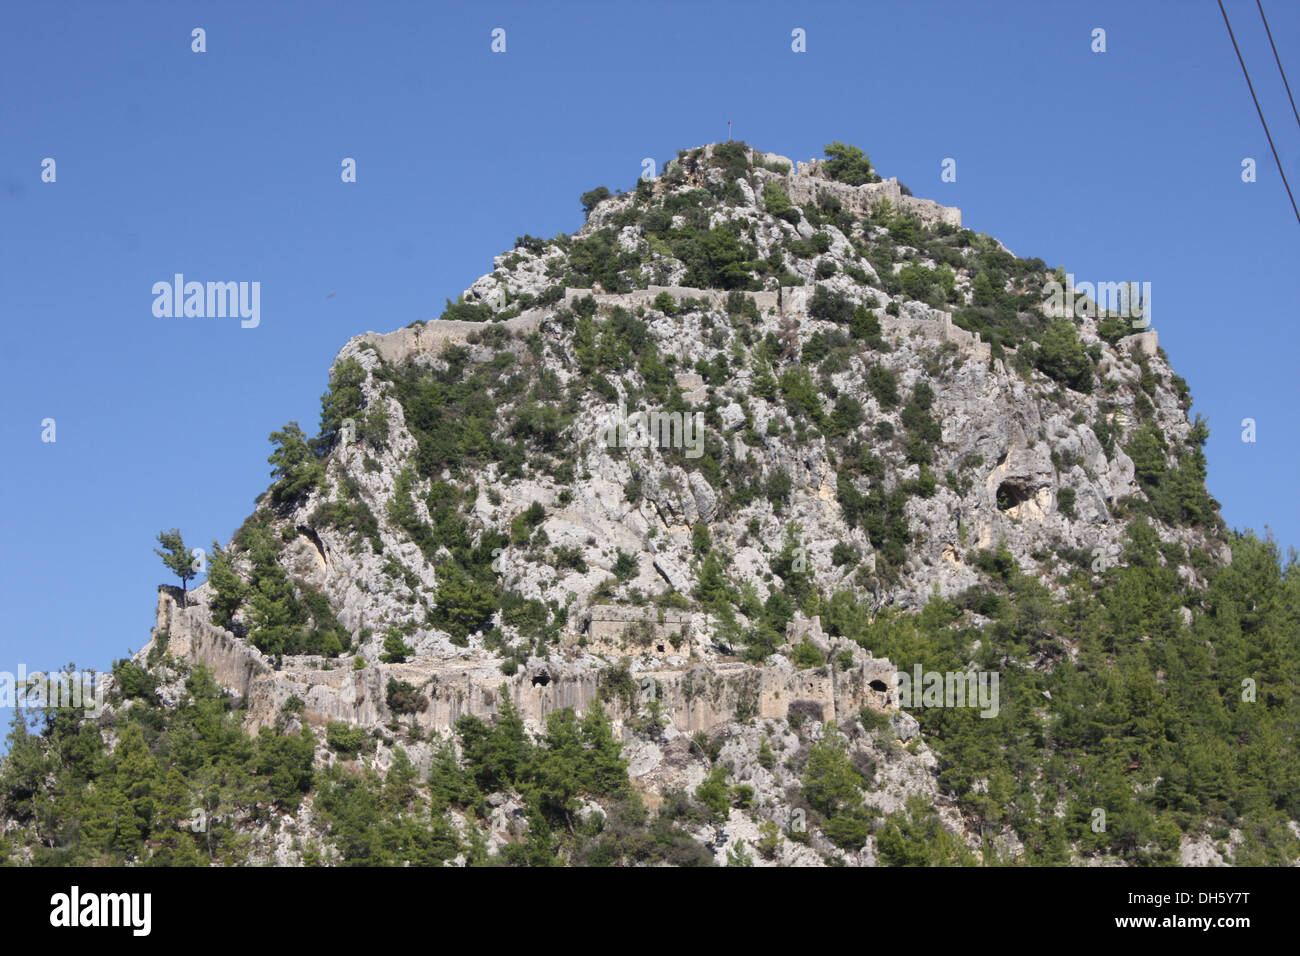 The hilltop fortress of Alara castle. Stock Photo